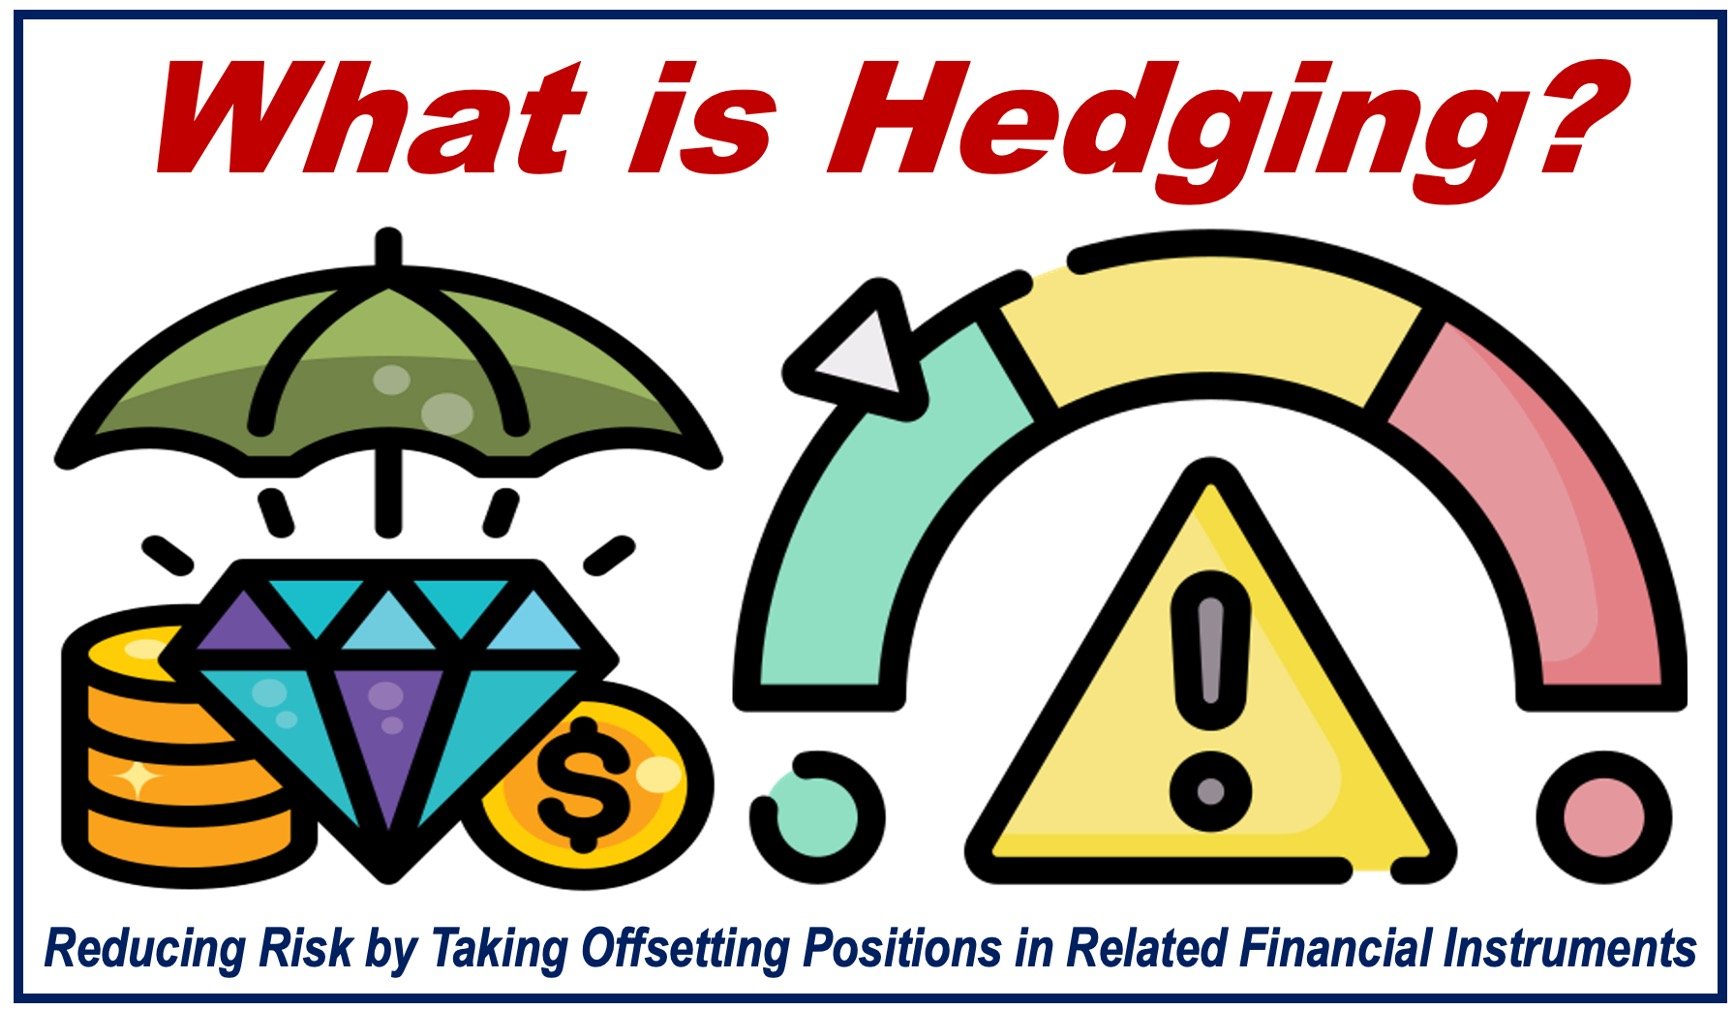 An image depicting and defining the term Hedging